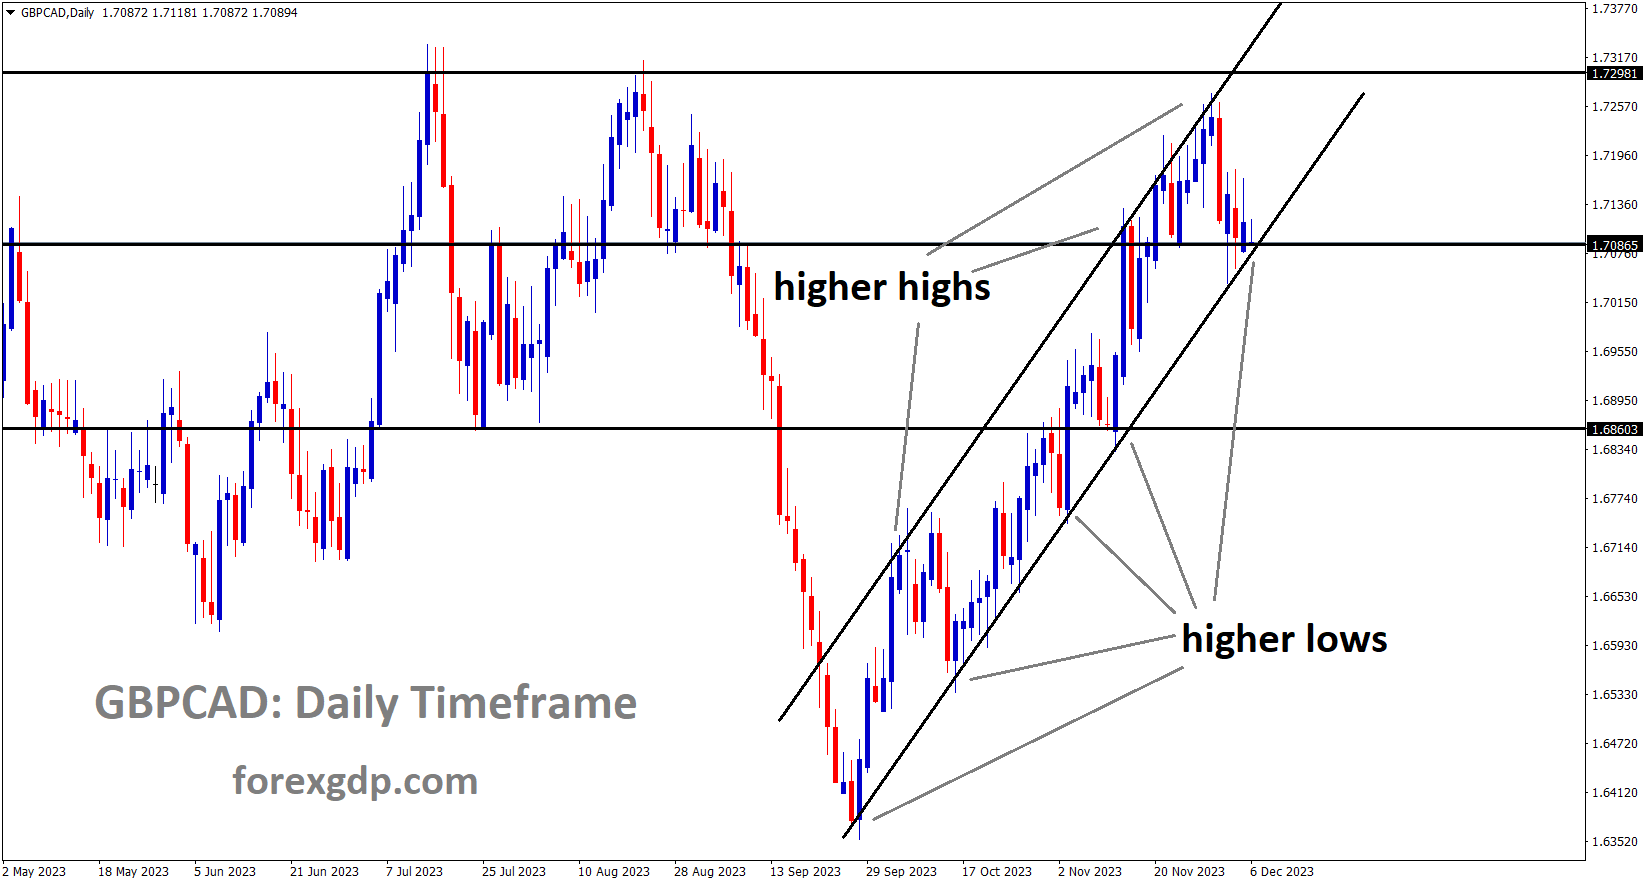 GBPCAD is moving in an Ascending channel and the market has reached the higher low area of the channel